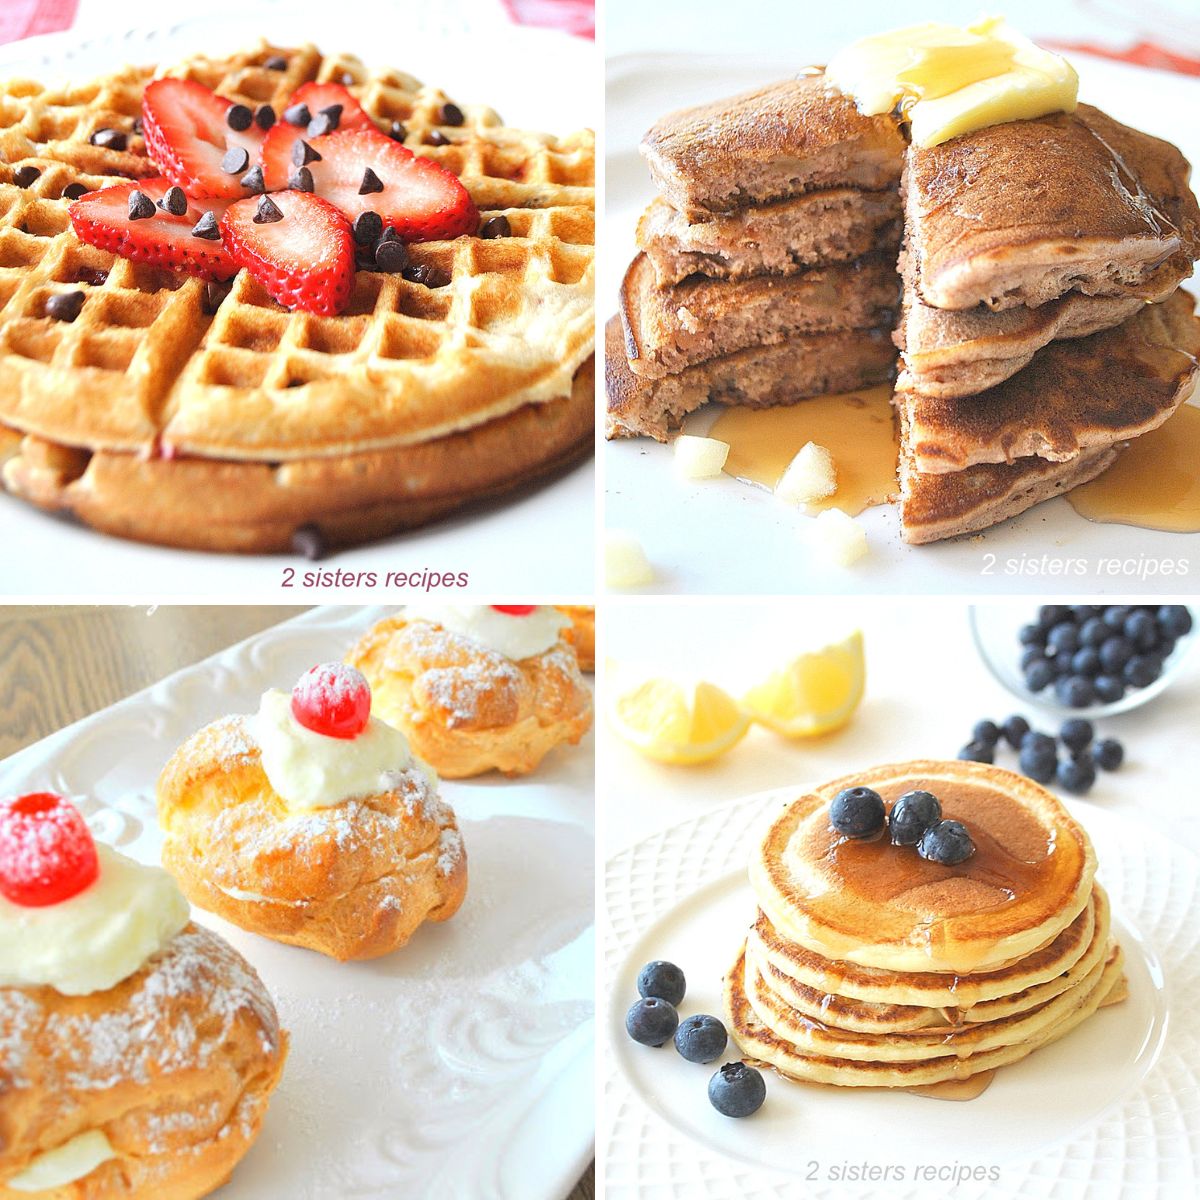 Waffles with fresh strawberries on top, a stack of pancakes with butter and syrup on top, a row of cream puffs, and small stack of pancakes with blueberries on top.